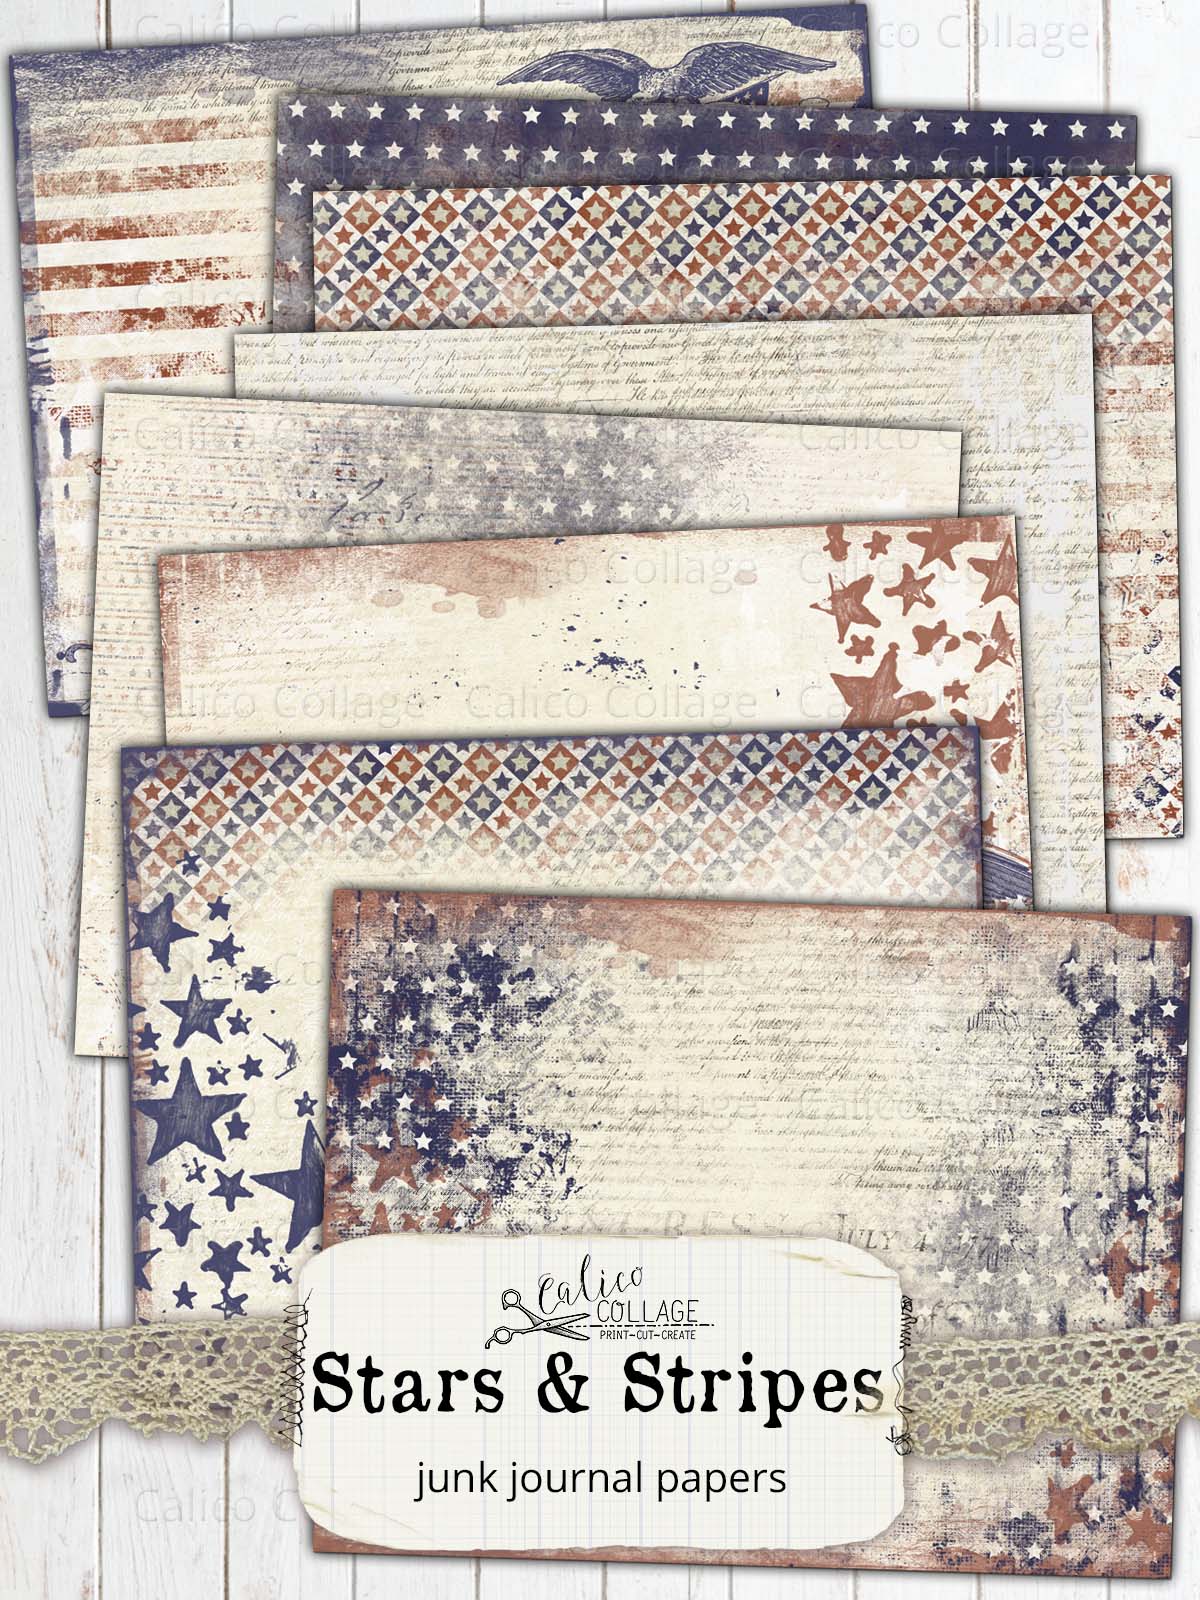 Stars & Stripes Junk Journal Papers